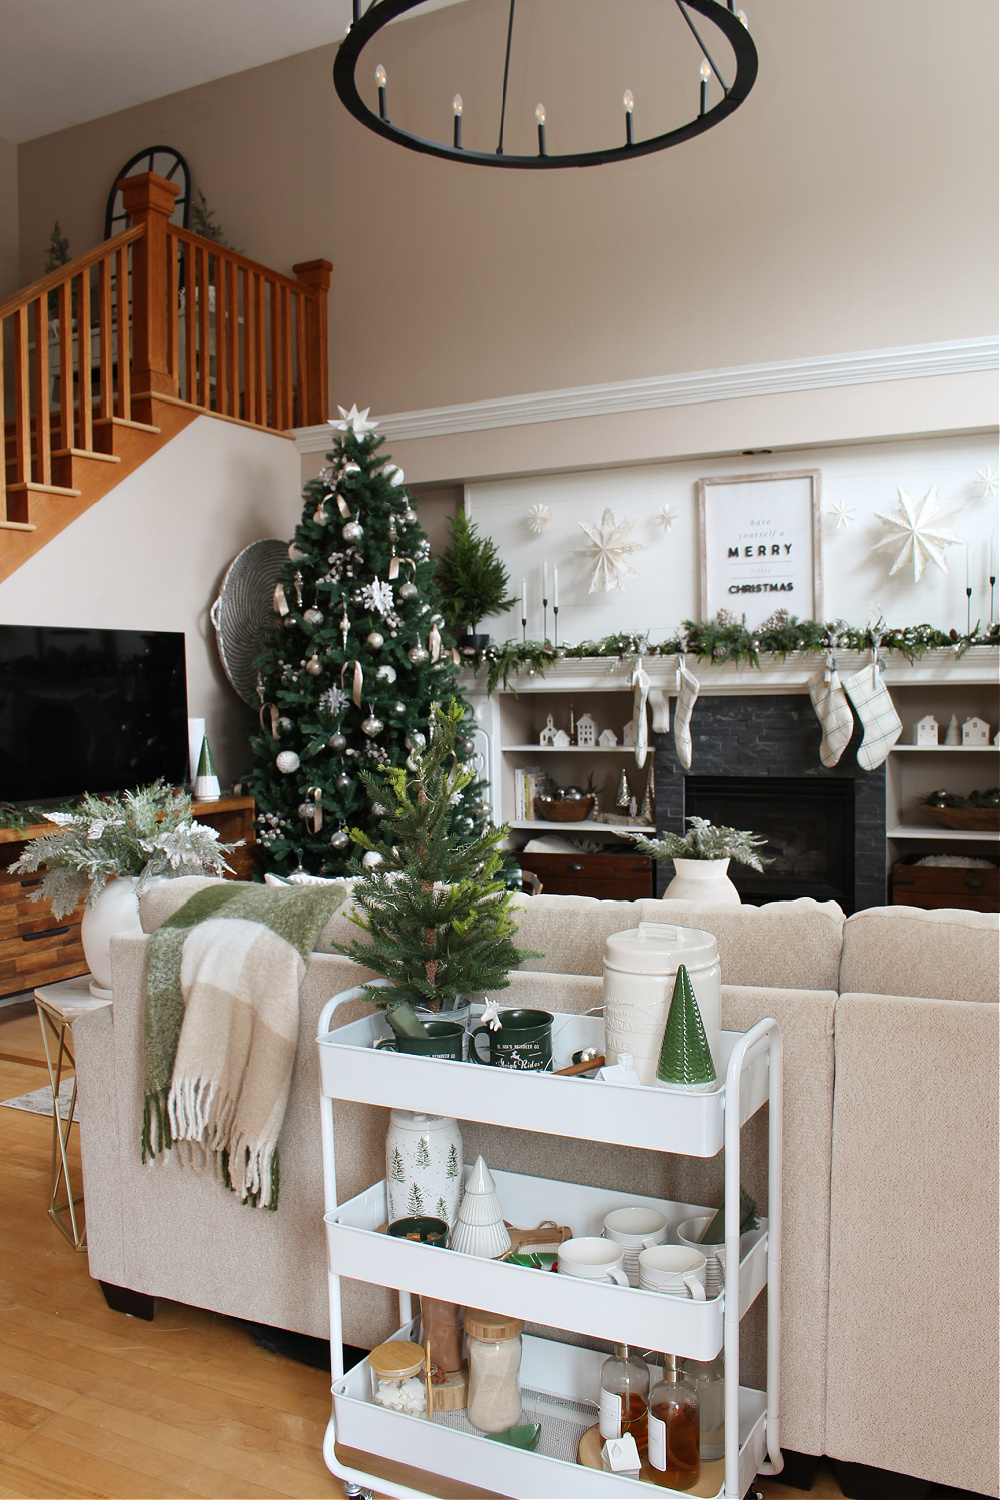 A cozy living room decorated with white and green for Christmas,